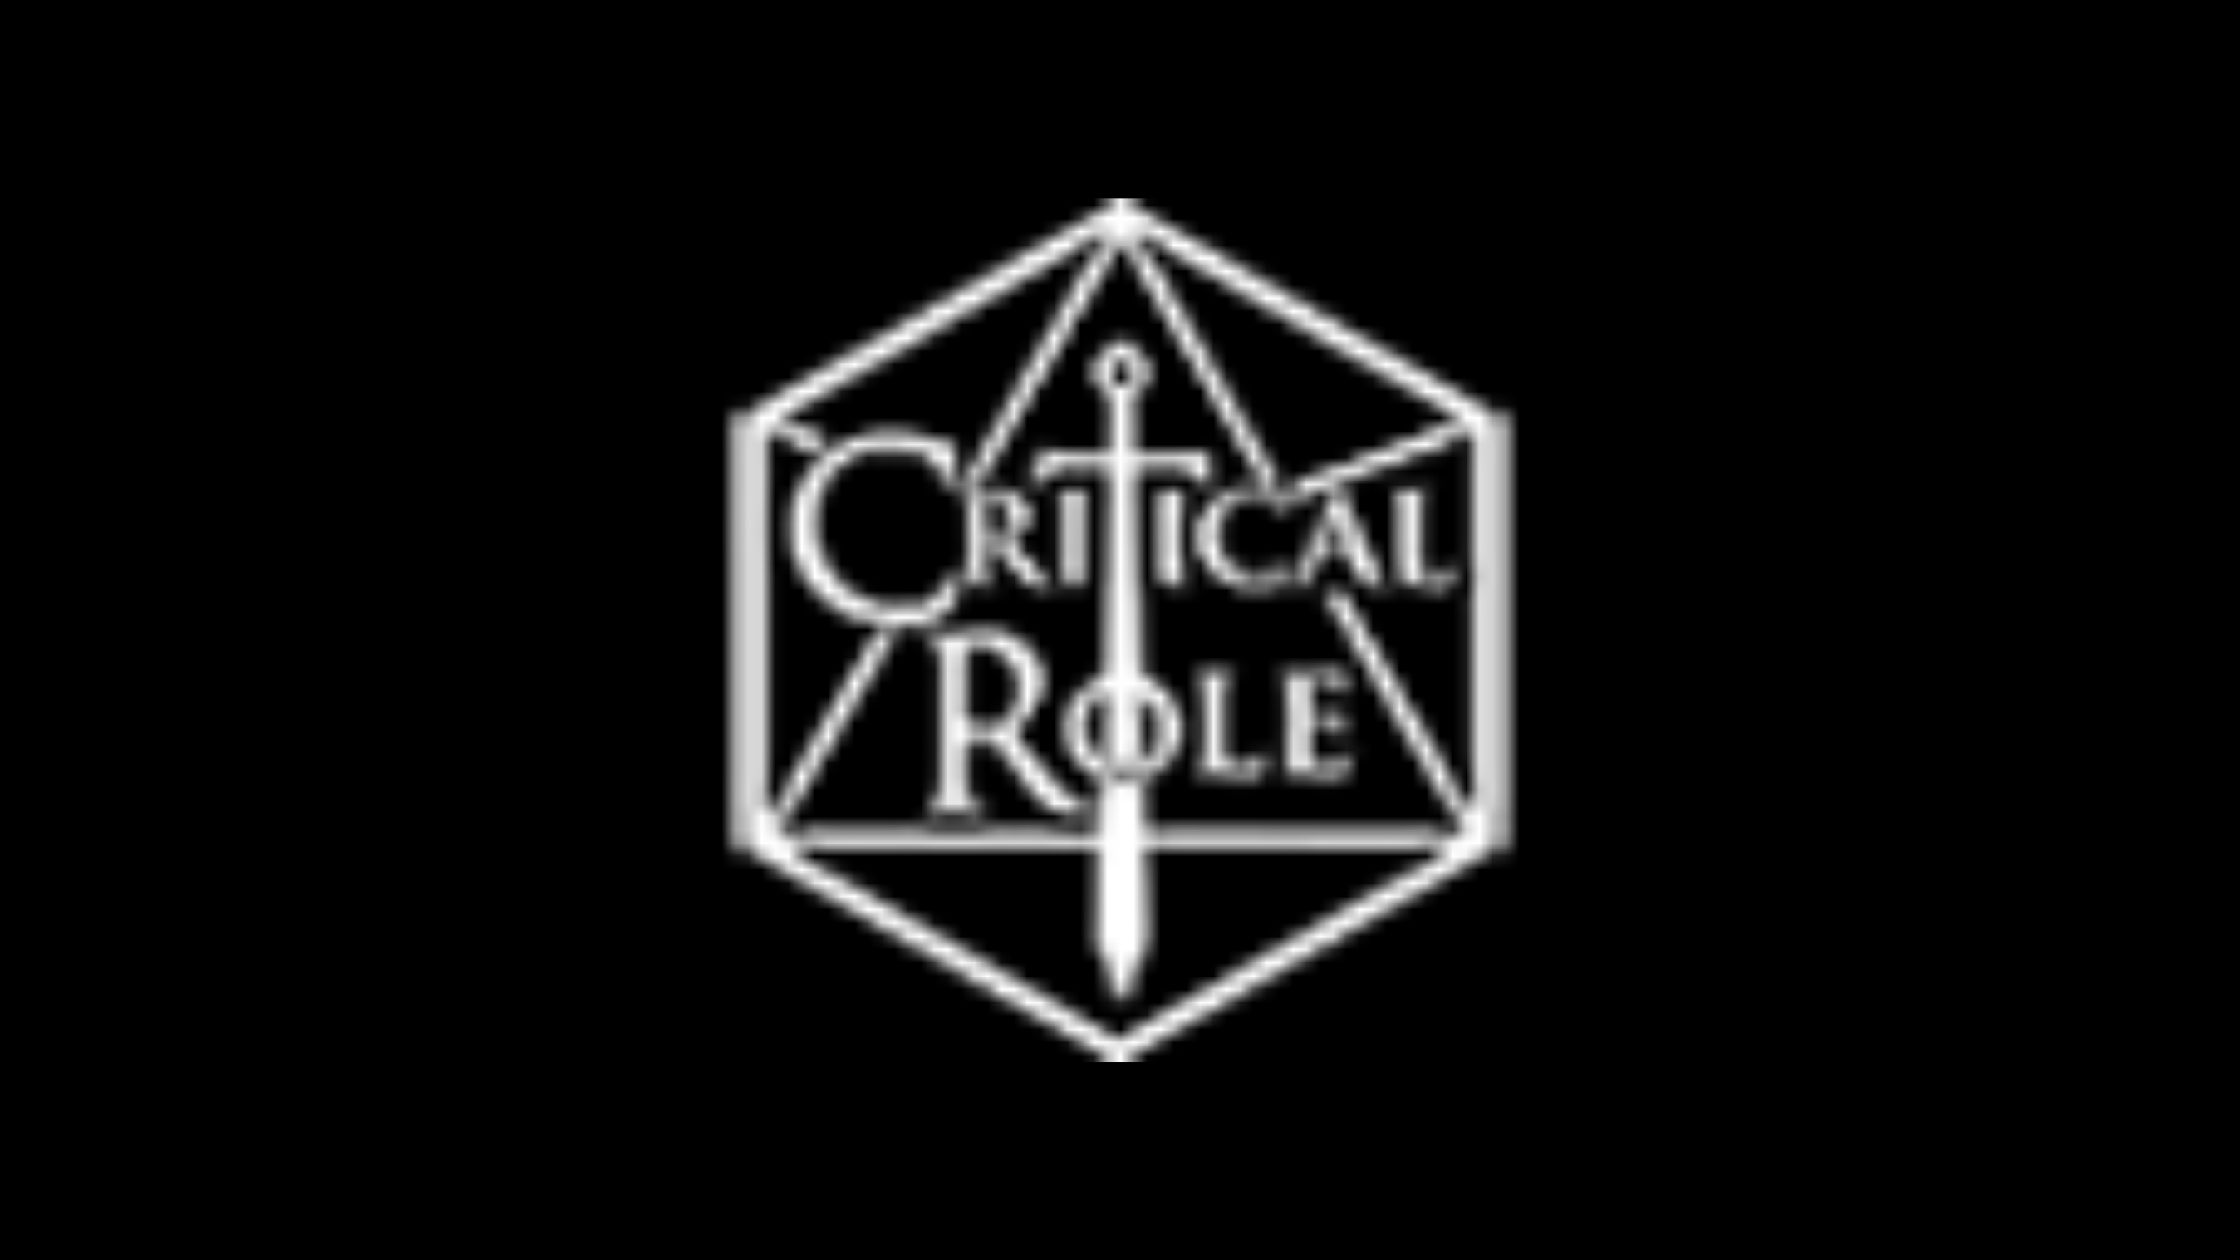 Critical Role Adventures is a popular legacy board game in 2021